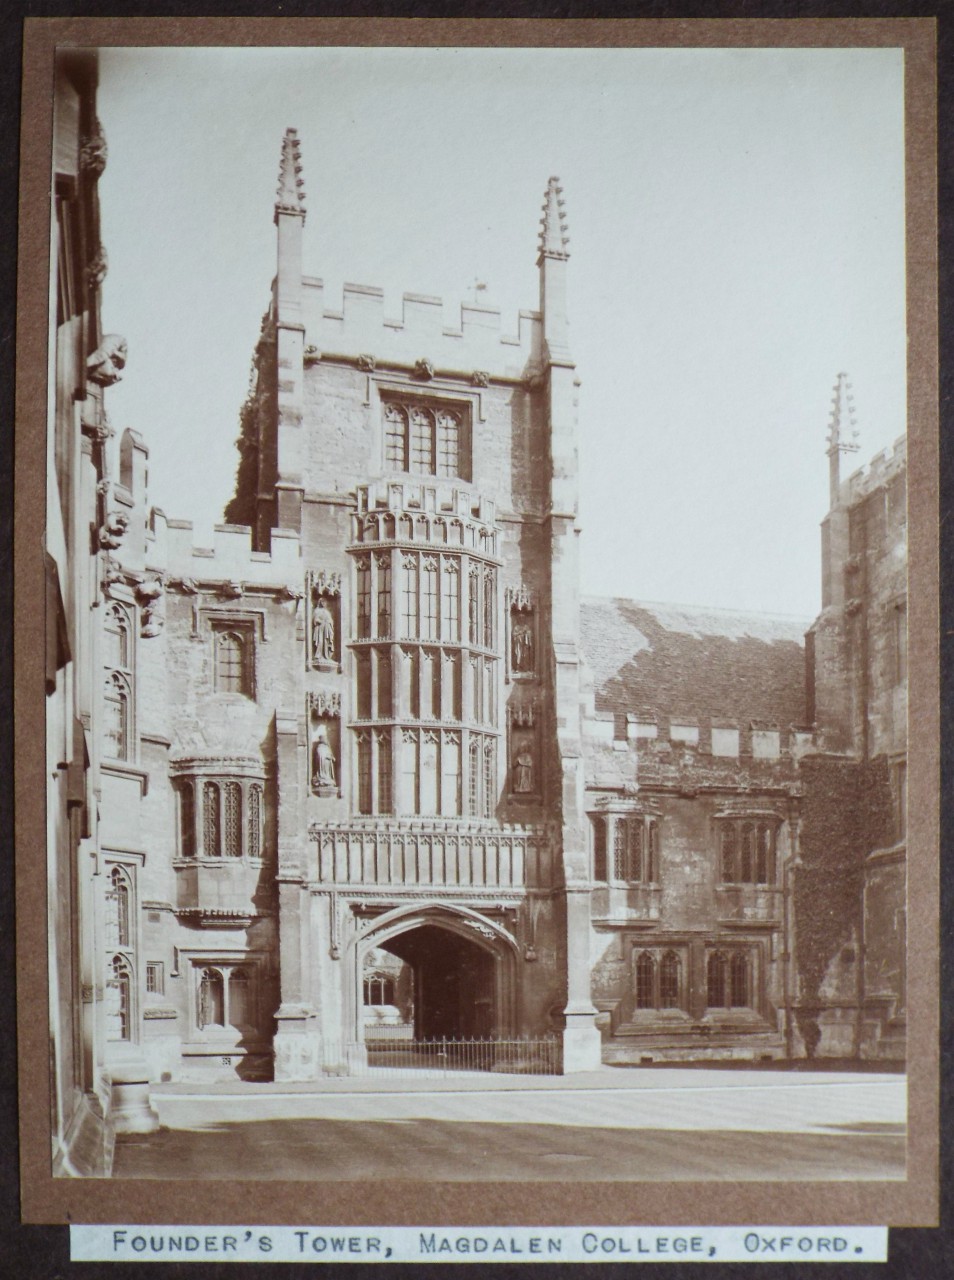 Photograph - Founder's Tower, Magdalen College, Oxford.